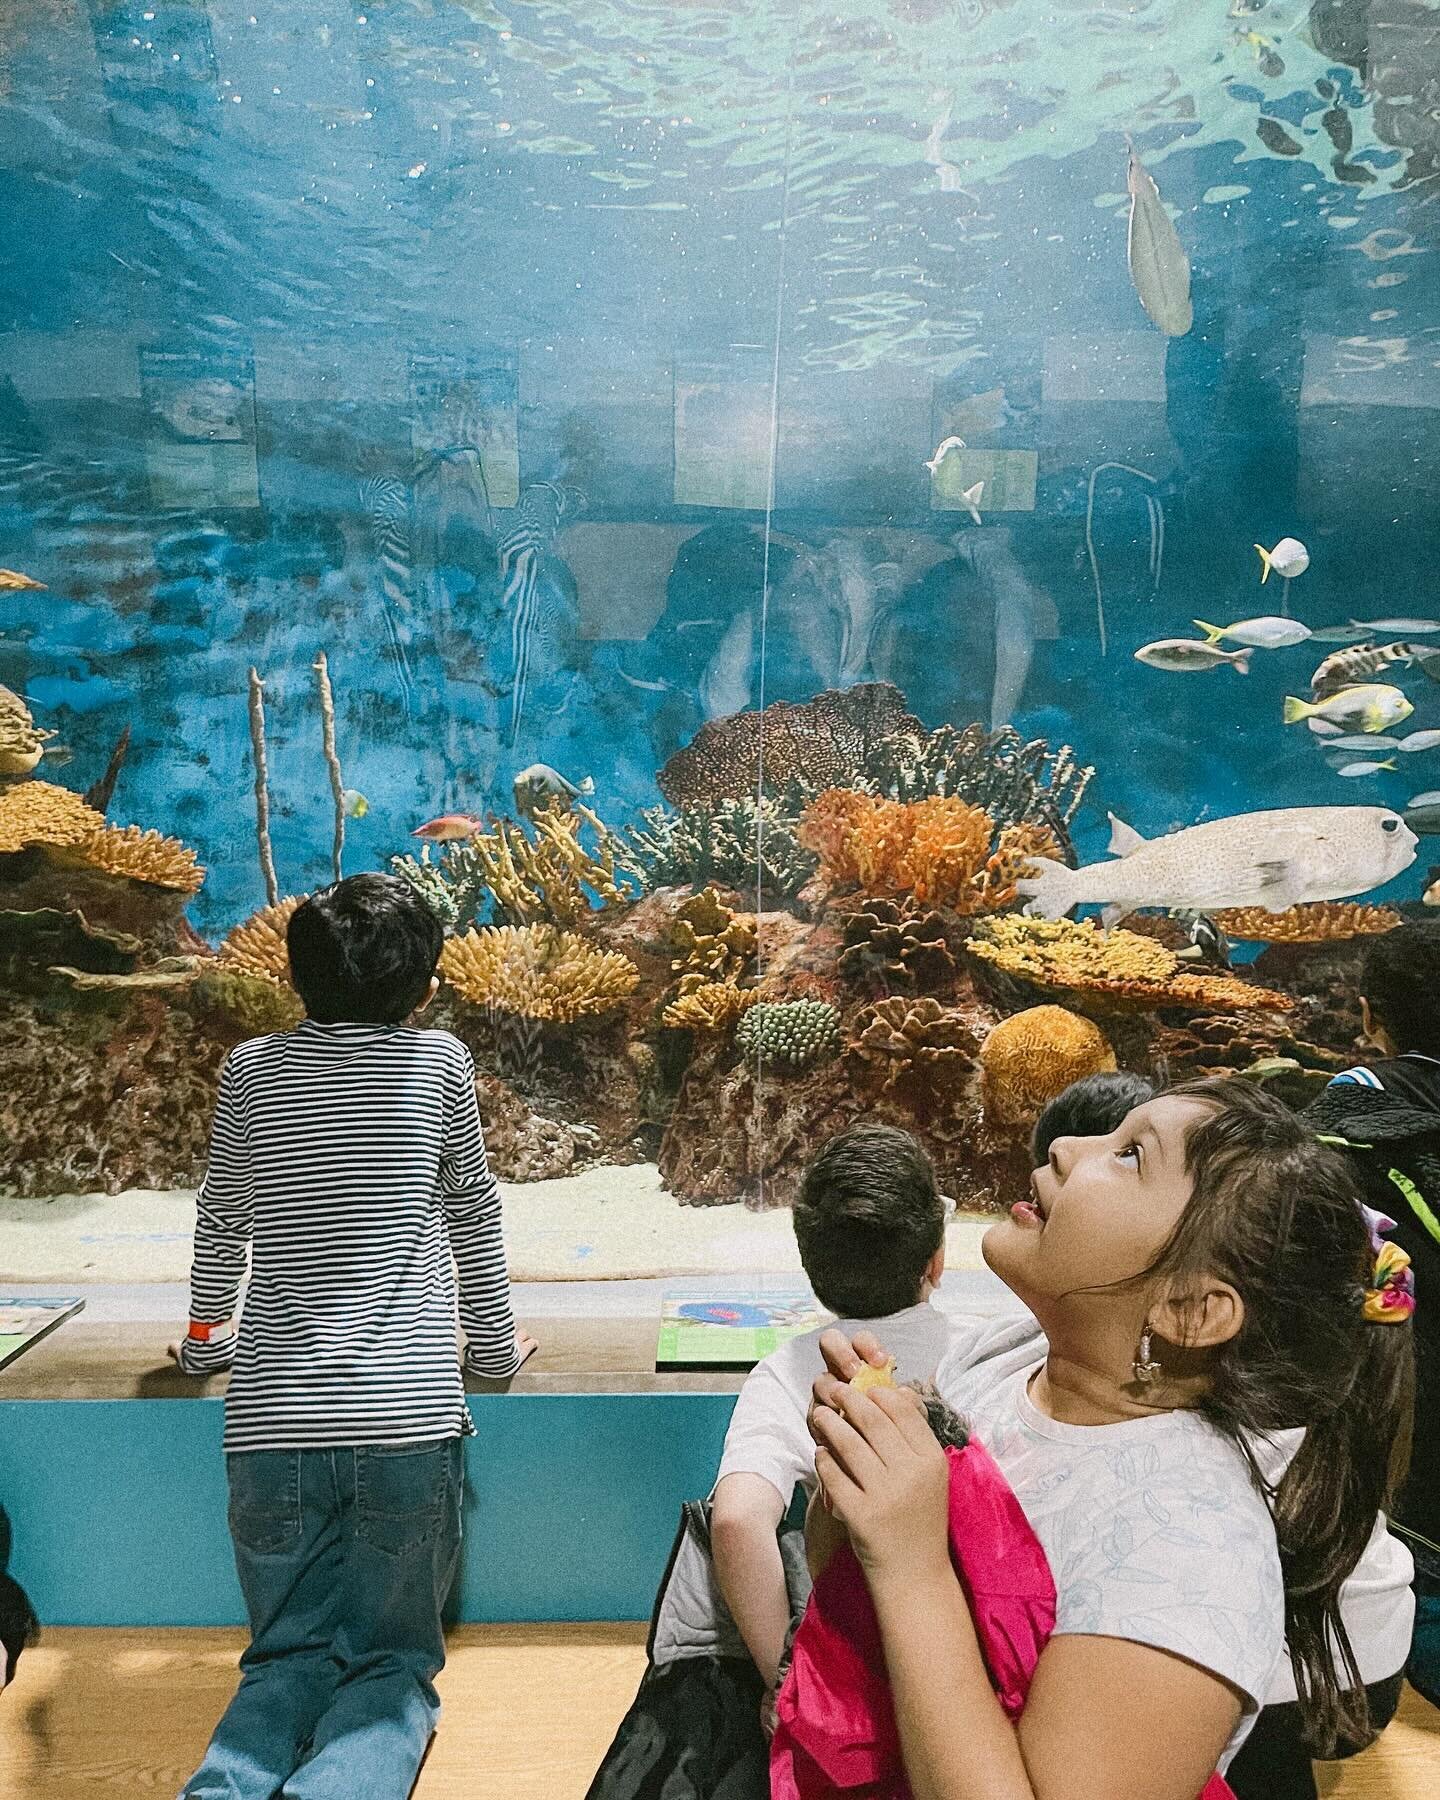 Our first graders spent the morning at the aquarium on Tuesday! 

Their aquarium visit was a preview of what&rsquo;s to come in their animals and habitats unit and served as an exciting introduction to the wonders they&rsquo;ll be exploring! #Curiosi